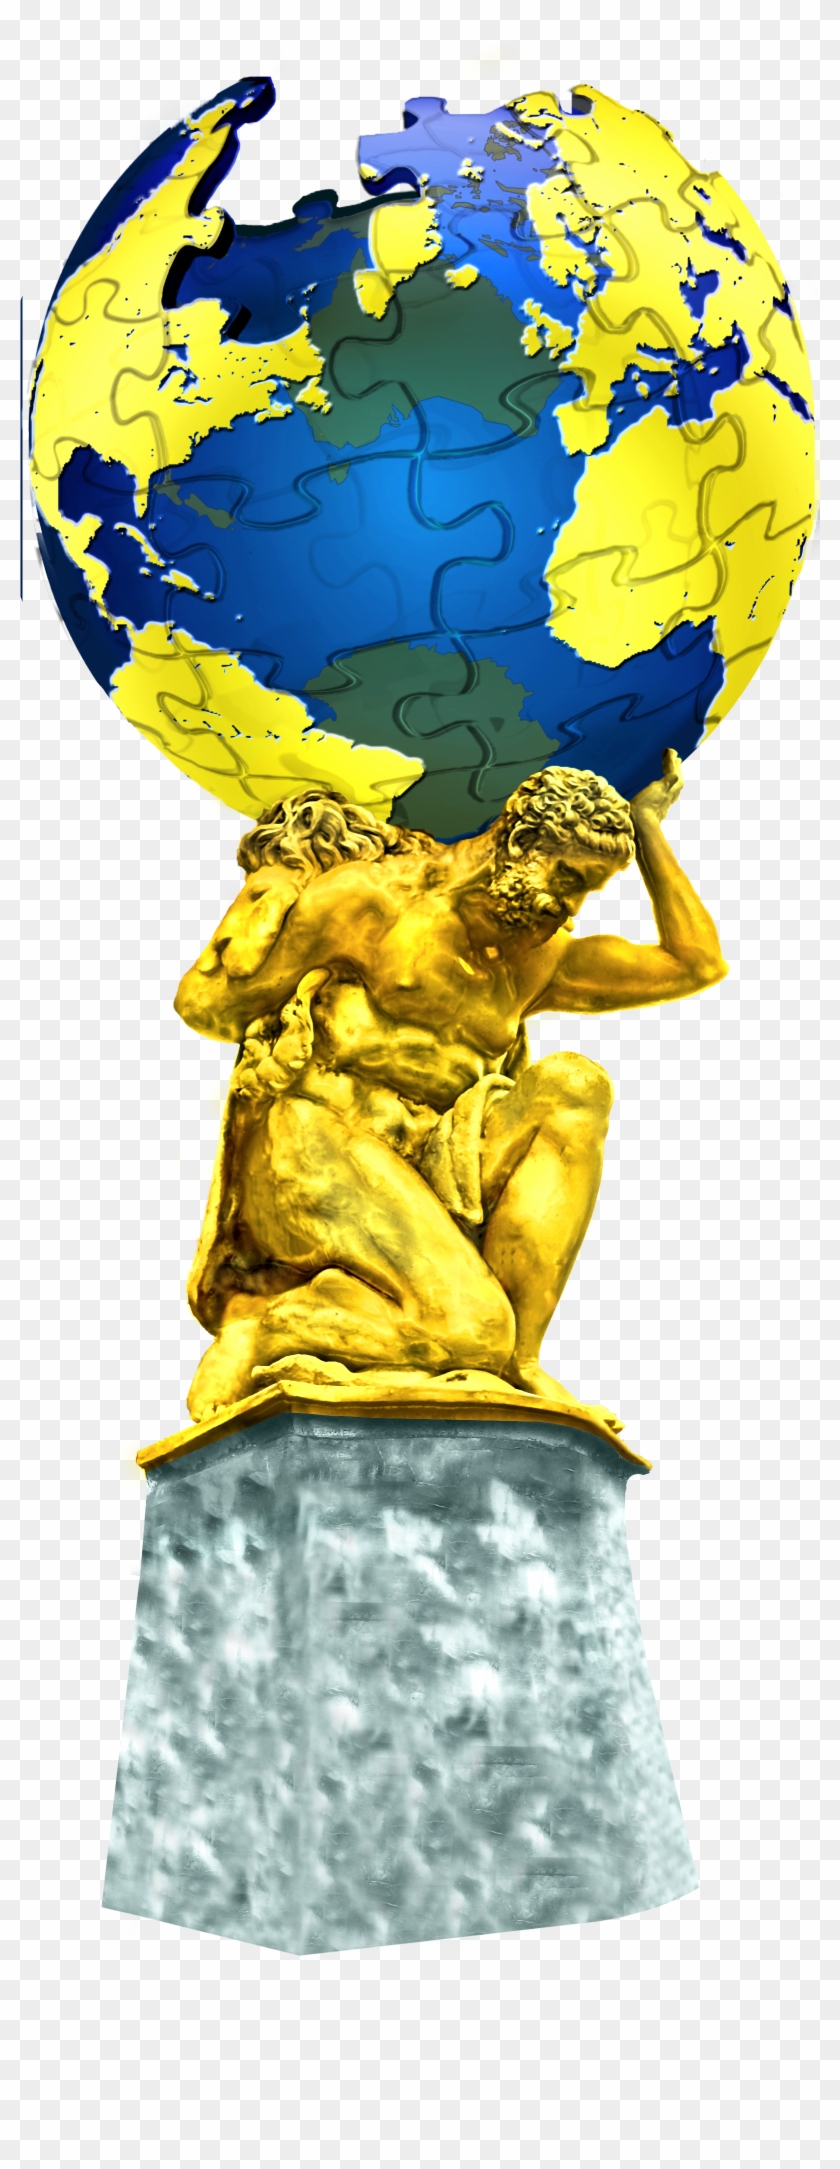 Atlas7beta Crystal - World Statue Png Clipart #3255145